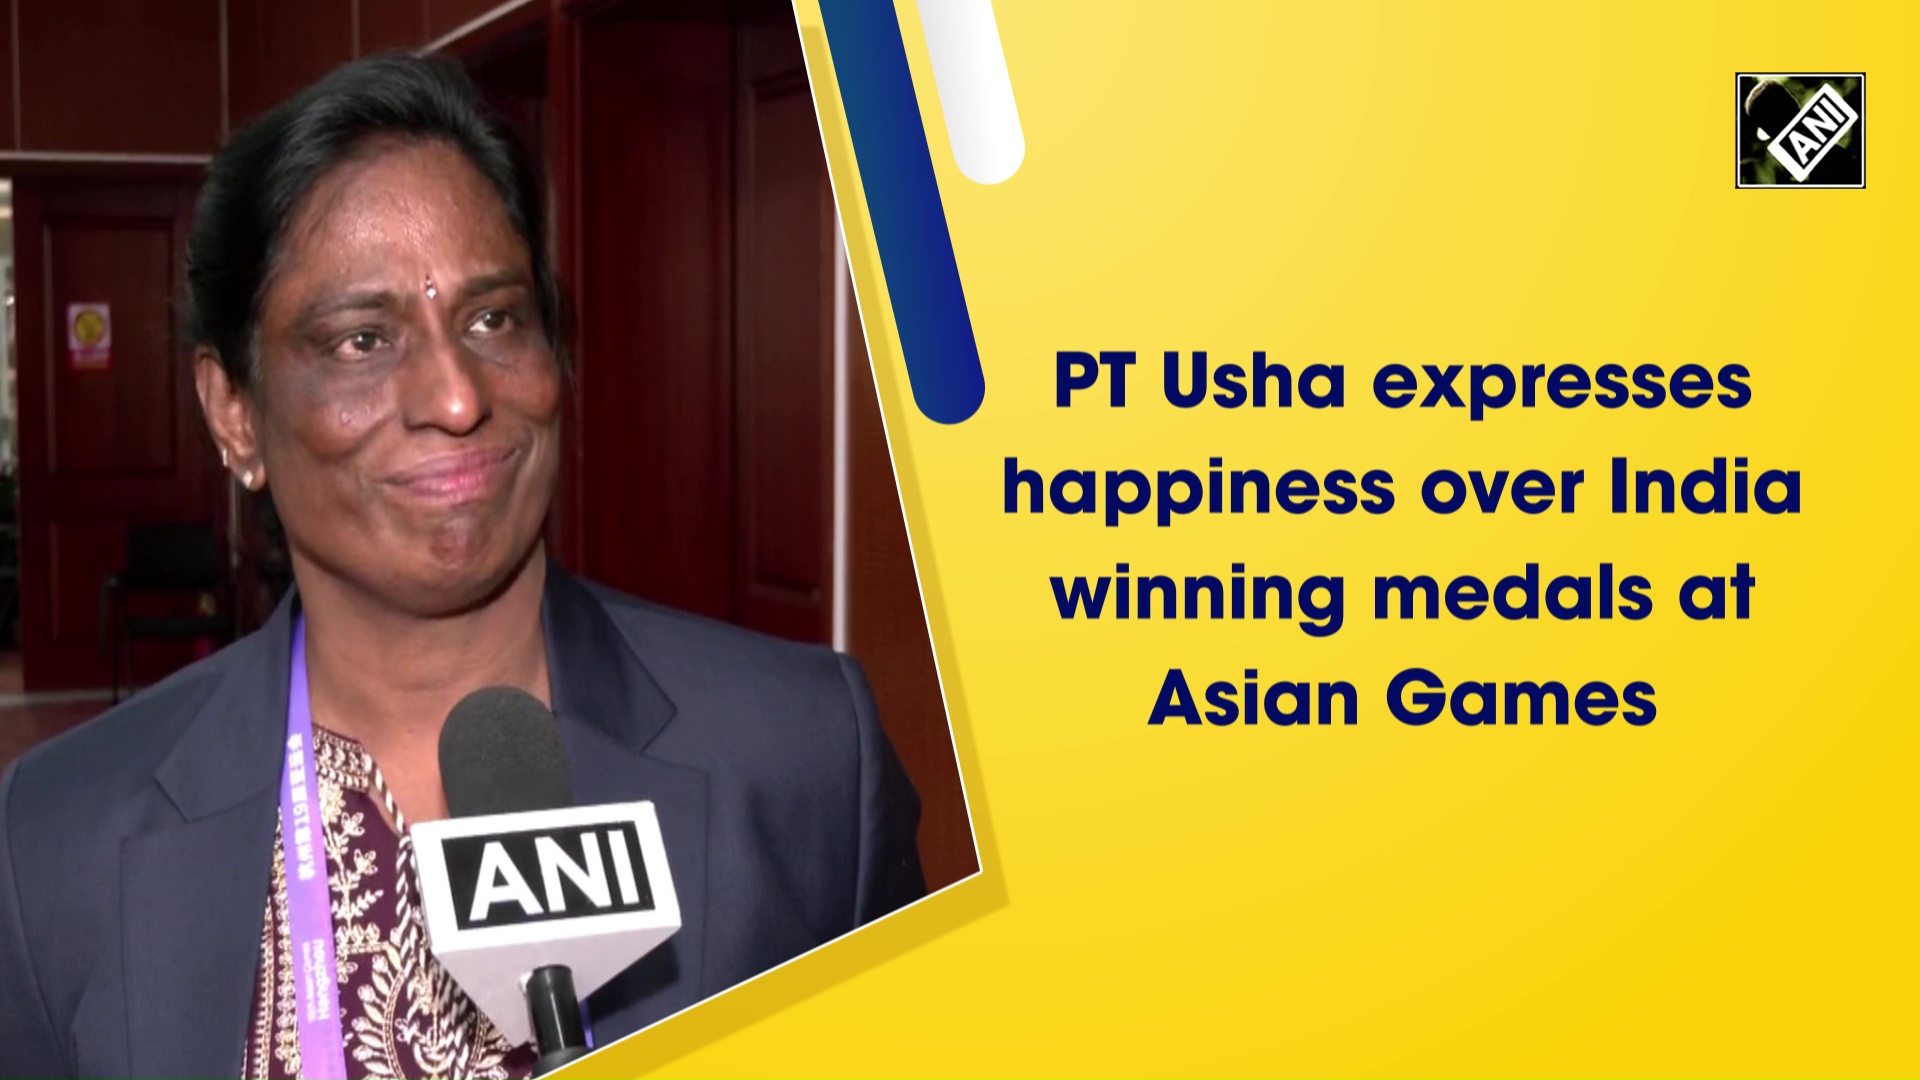 PT Usha expresses happiness over India winning medals at Asian Games